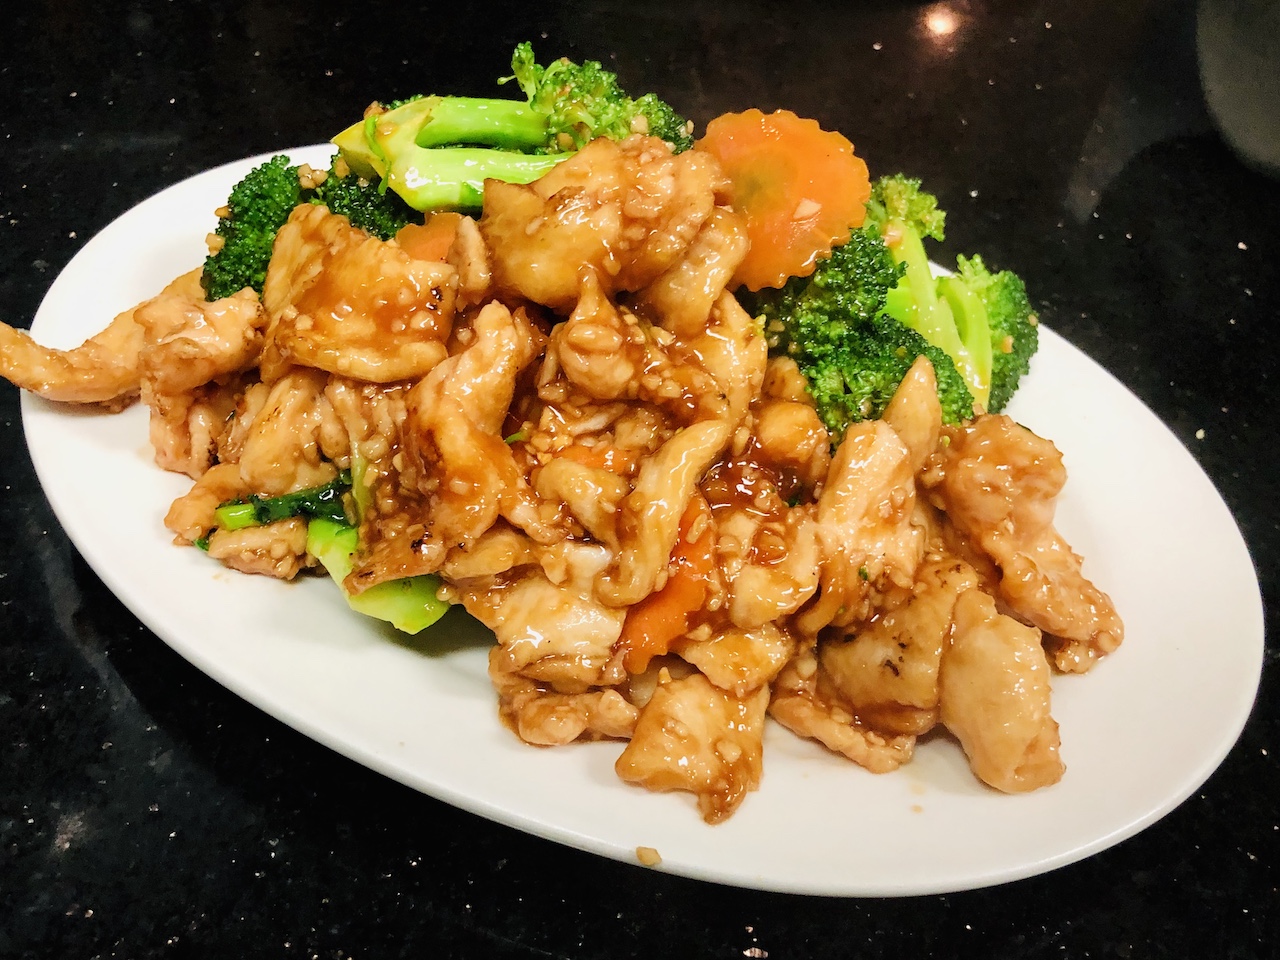 Chicken with Broccoli 芥蓝鸡